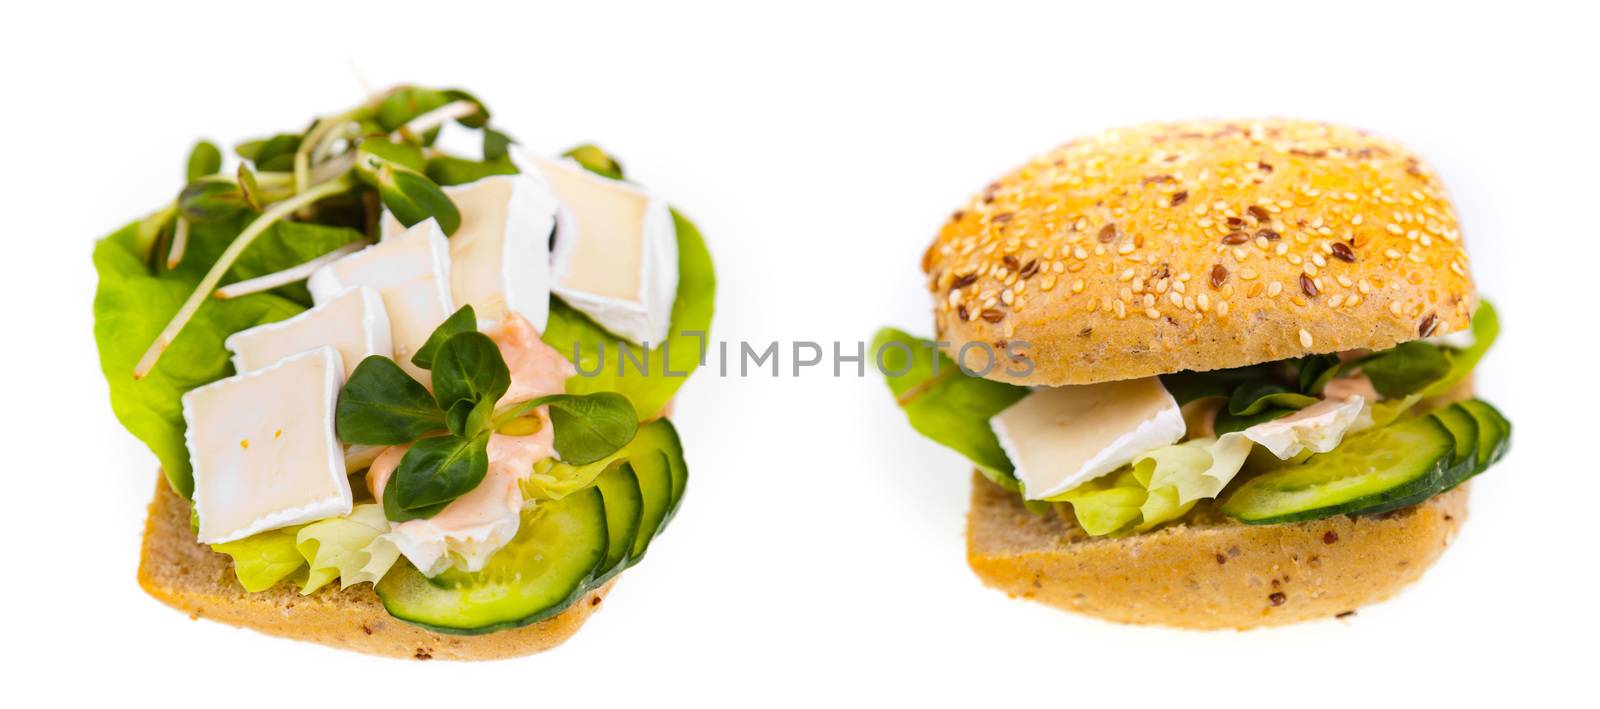 Delicious and healthy sandwich - two photos isolated on white